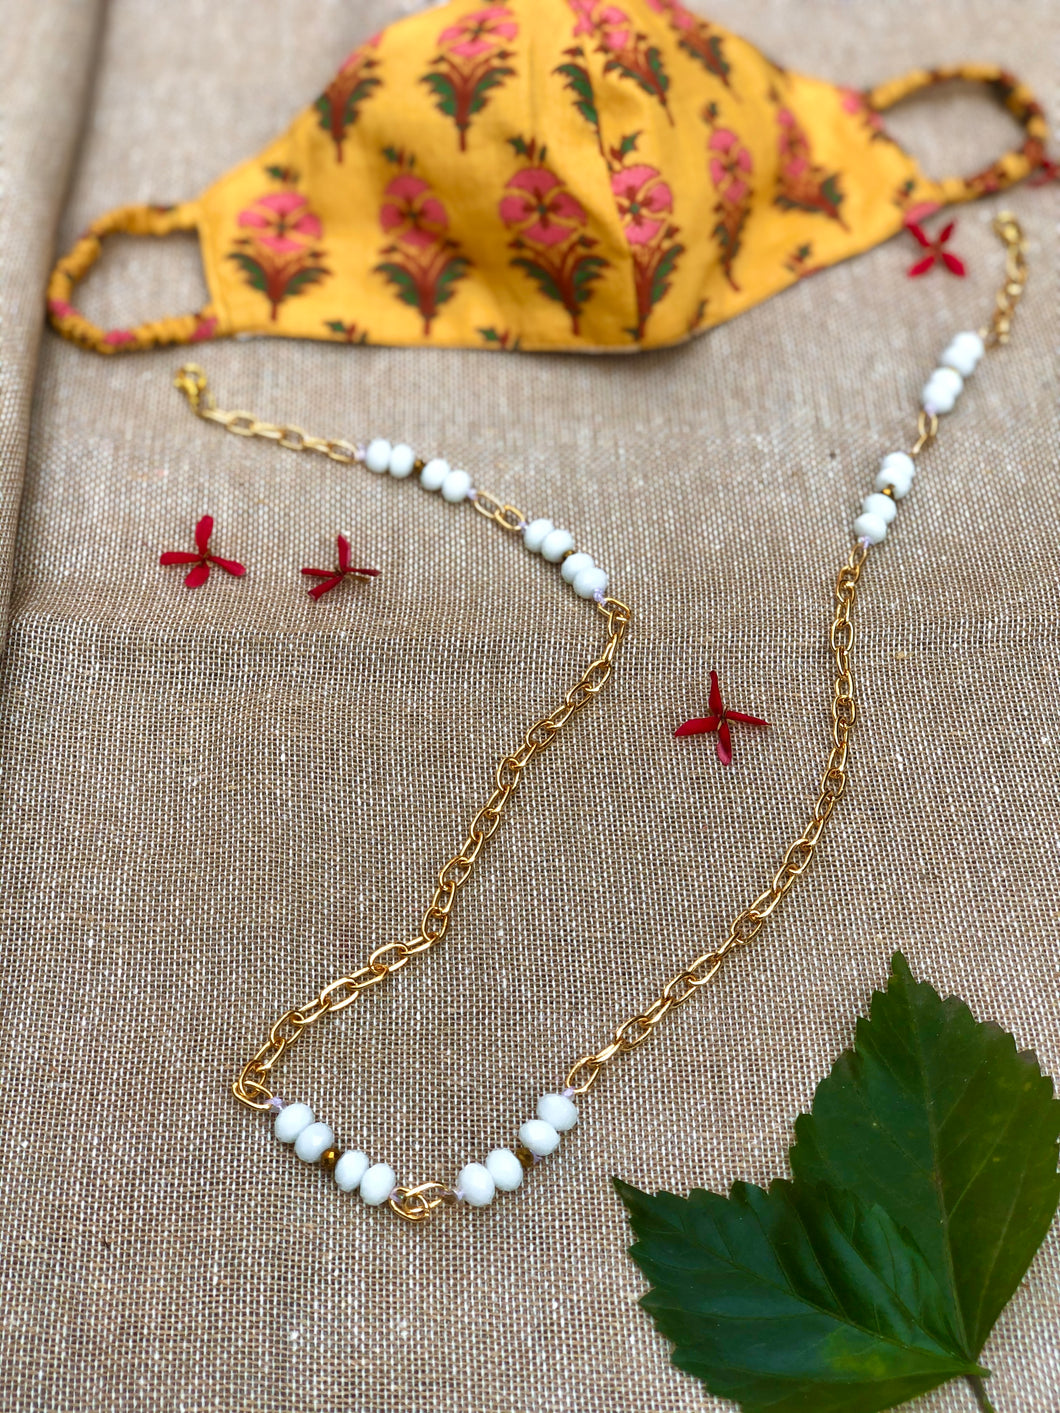 Gold Chain With White Cut Beads